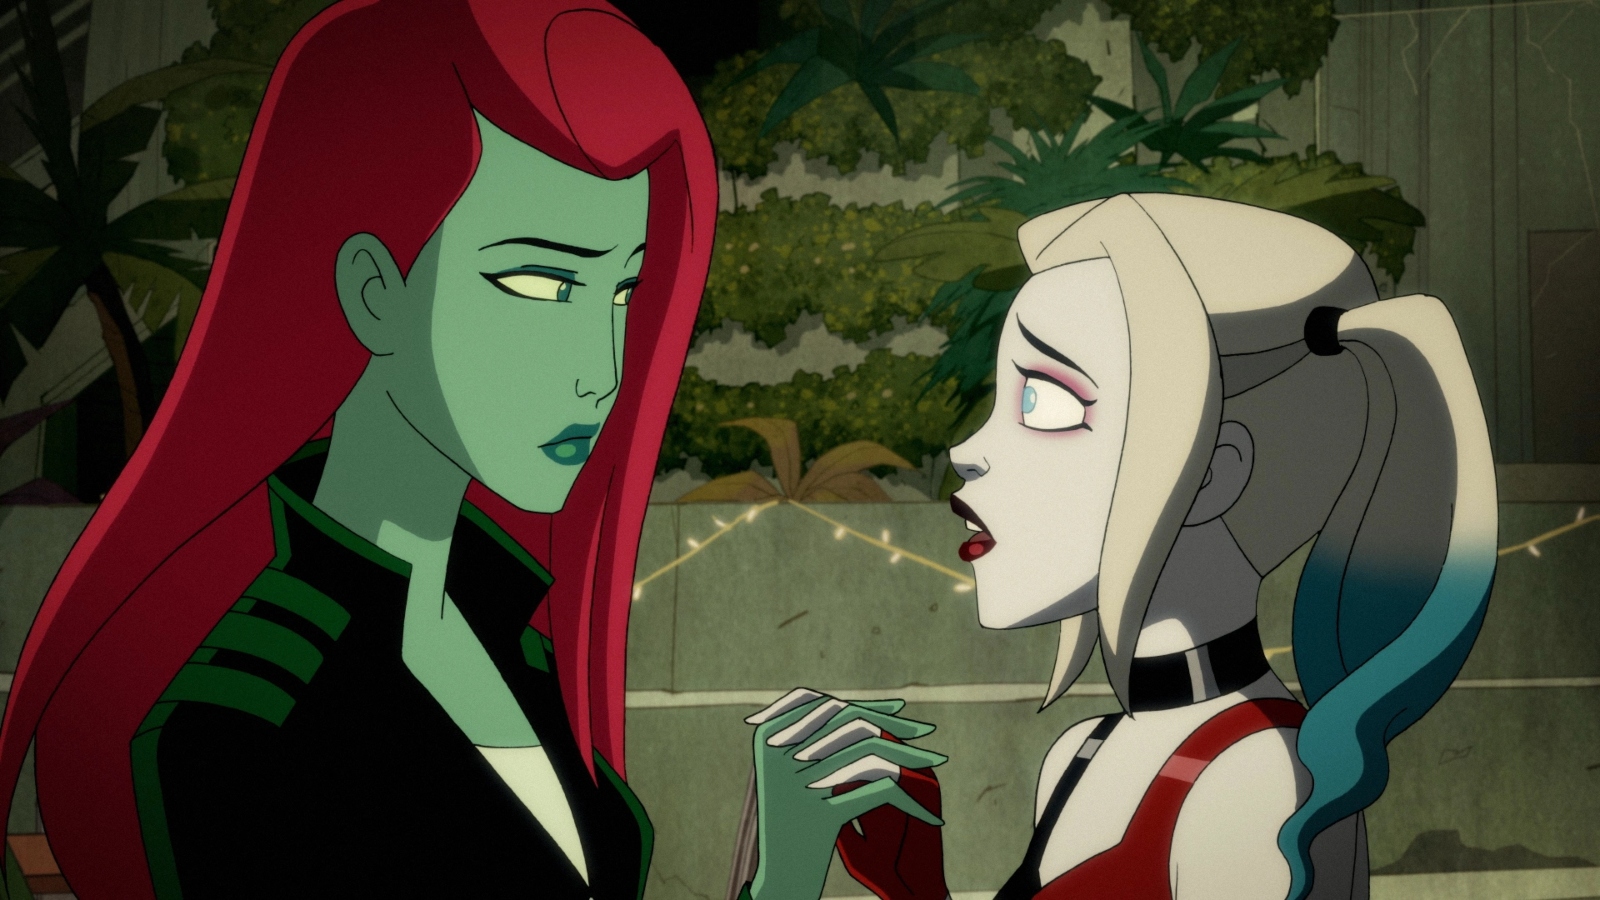 Margot Robbie Has Been 'Pushing' for Harley Quinn/Poison Ivy Romance